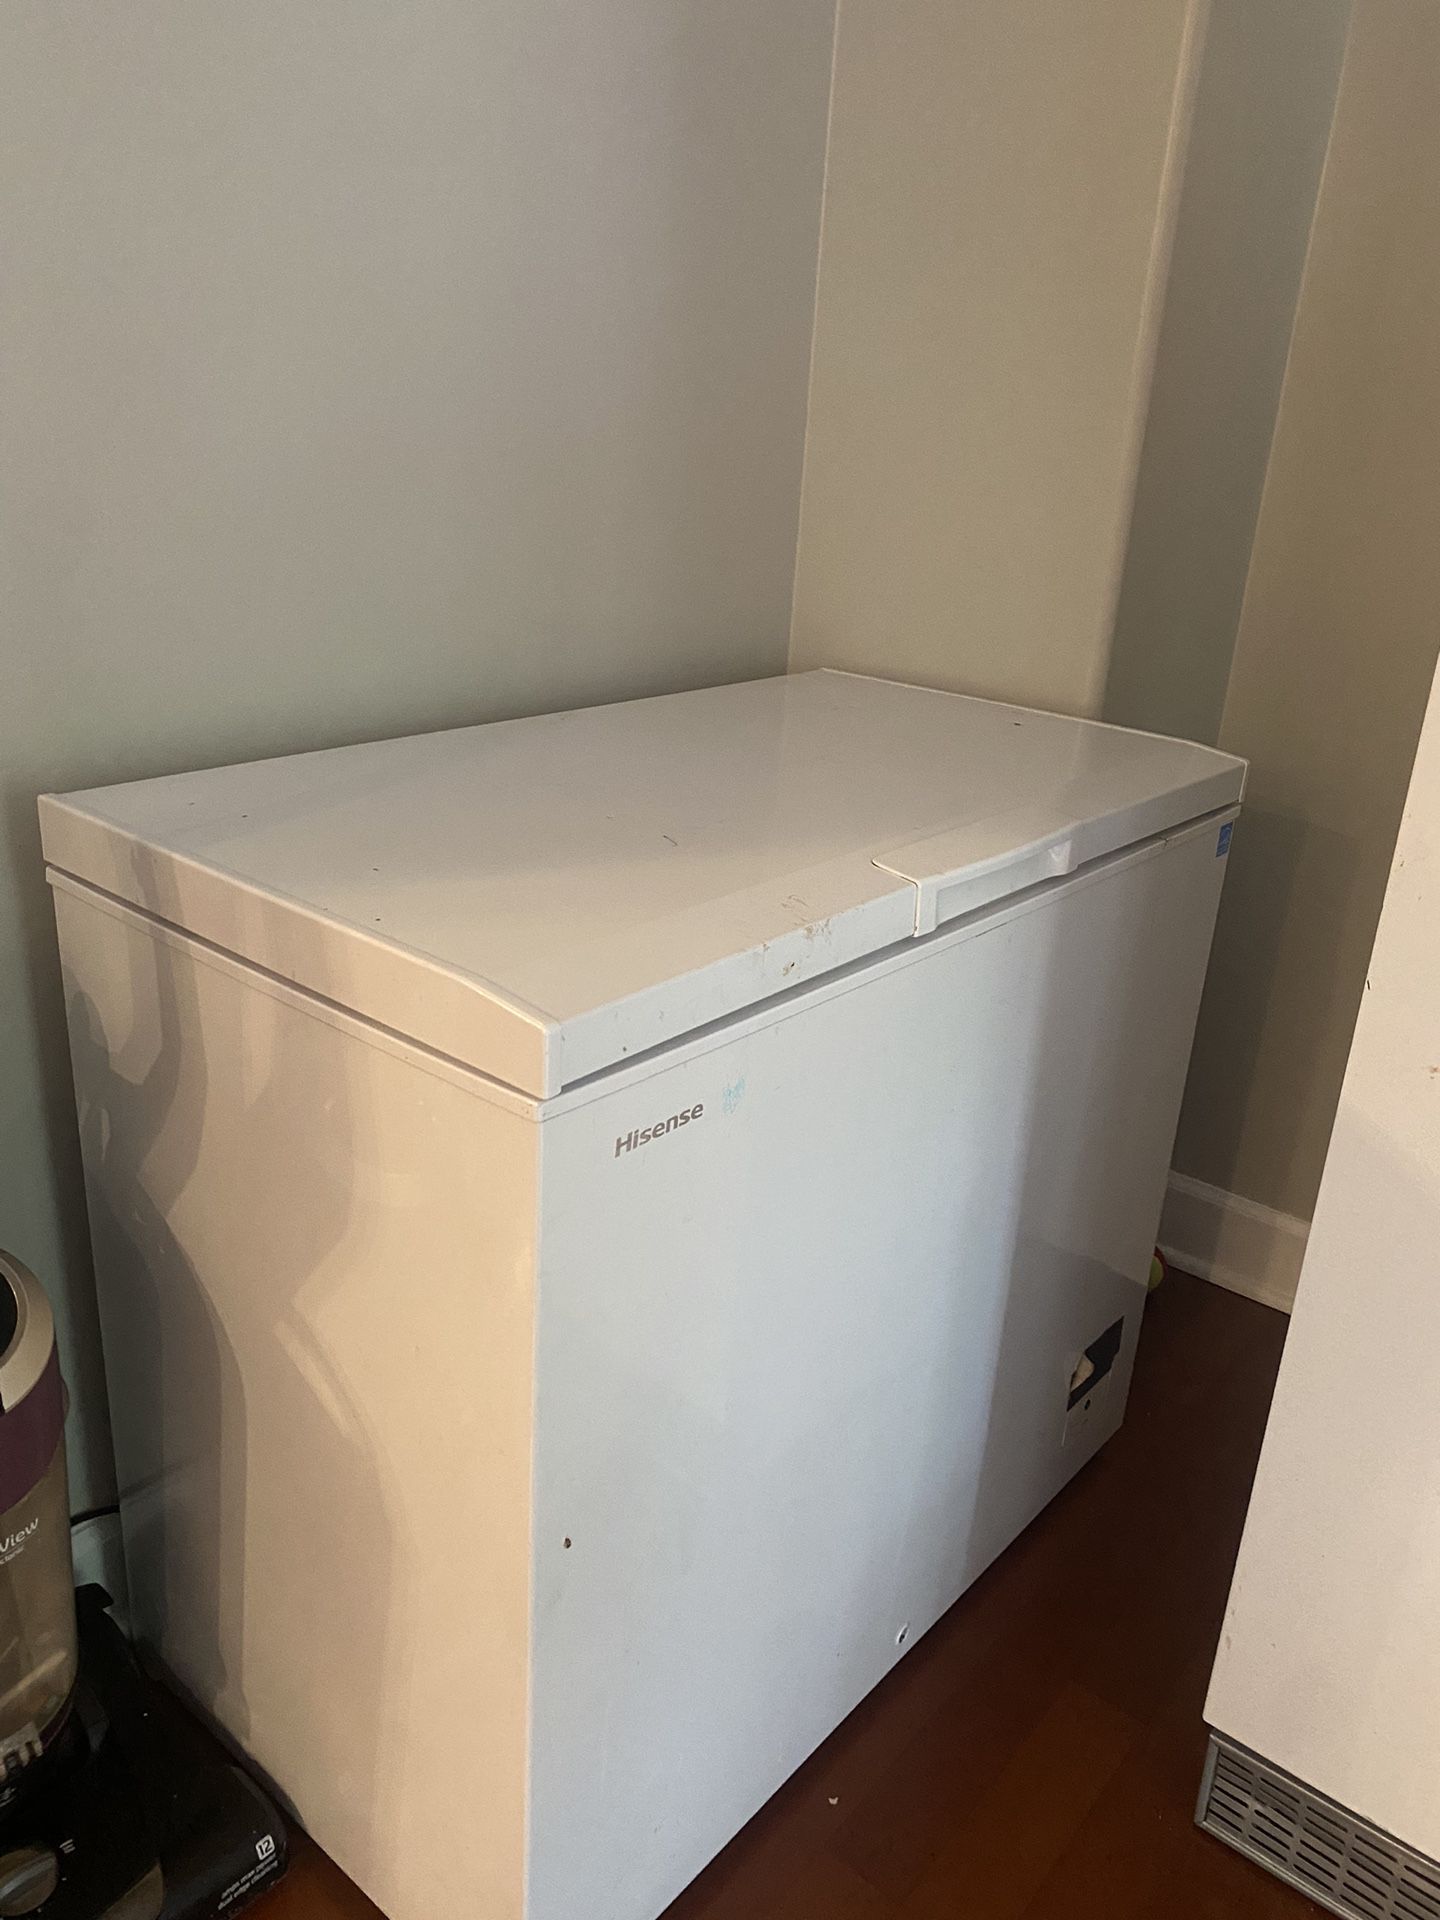 Chest freezer works great get super cold 130$